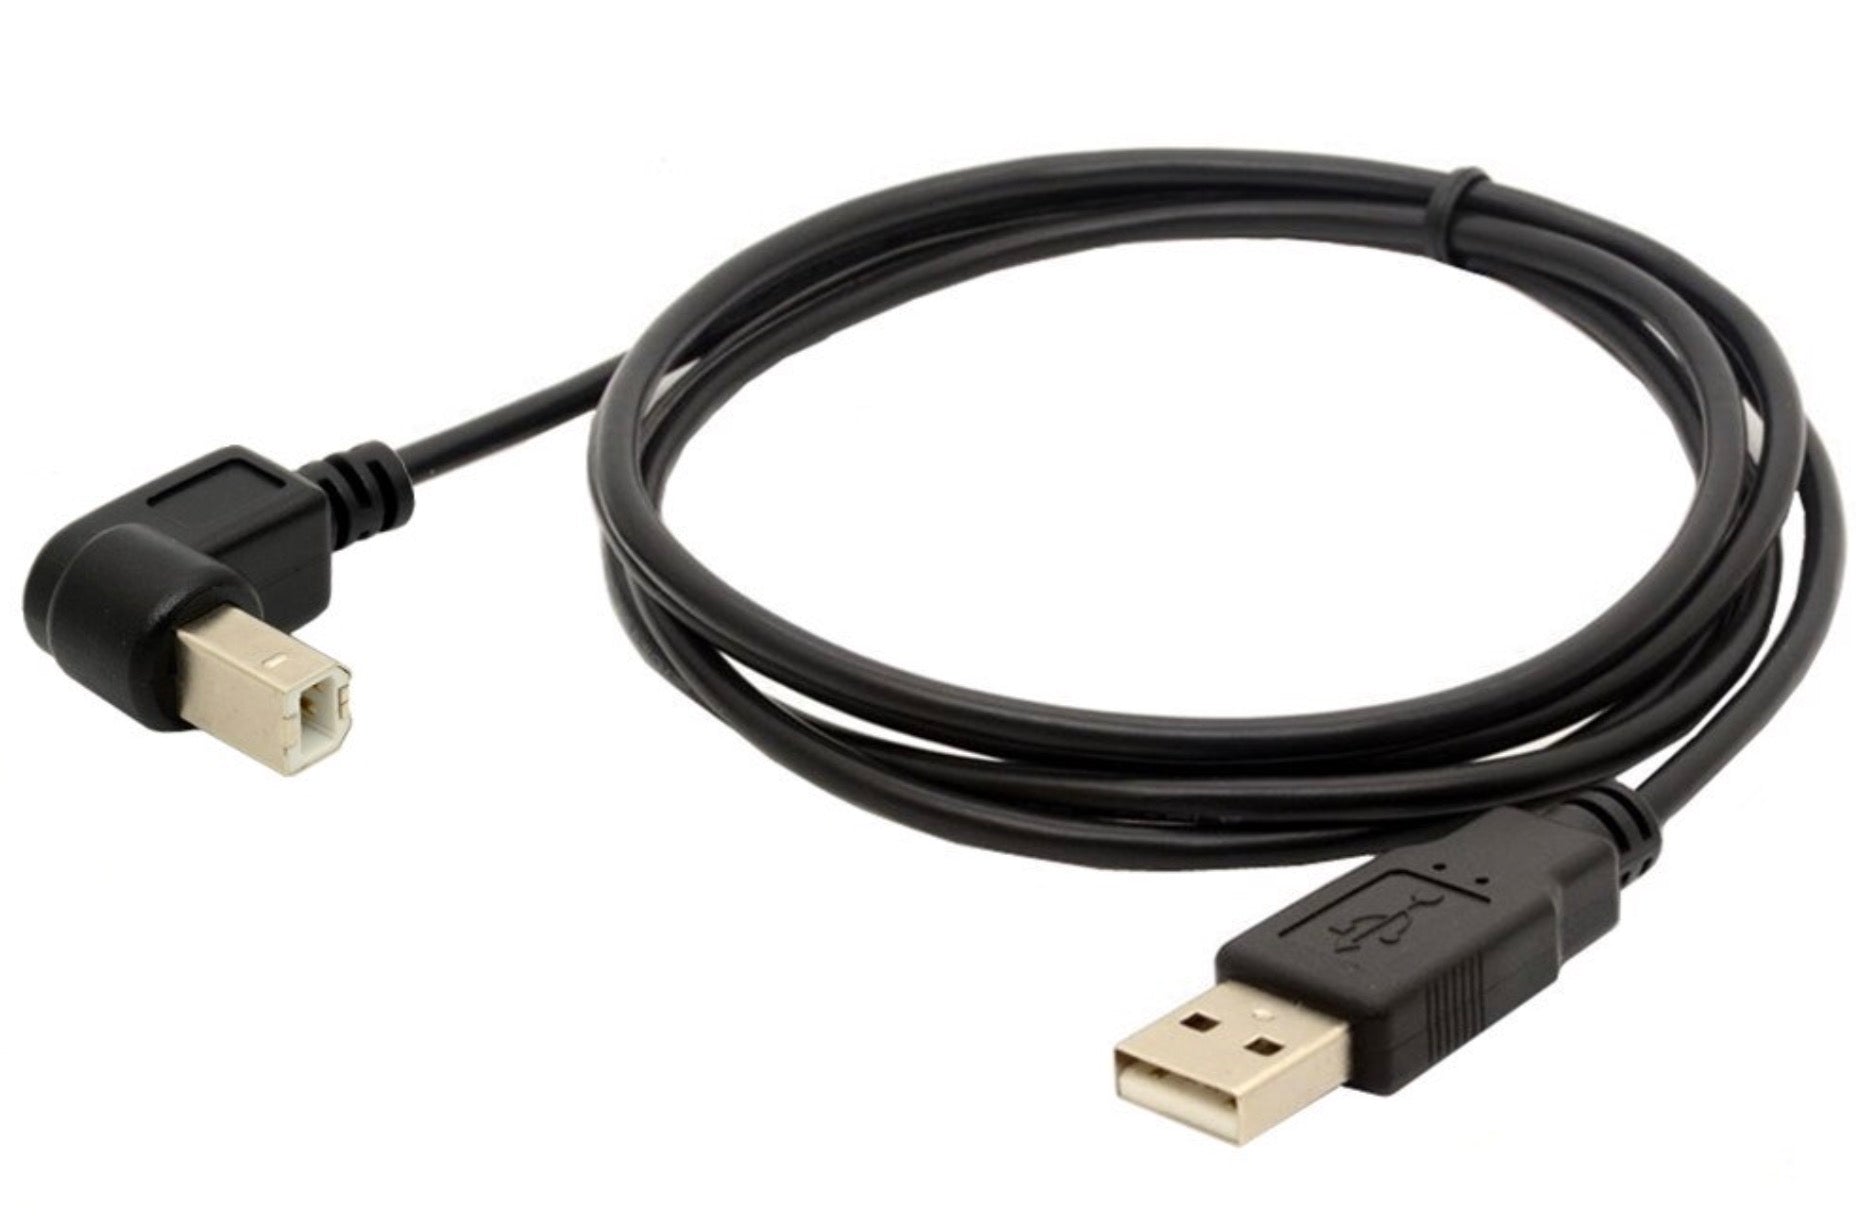 USB 2.0 Type A Male to Type B Male 90 Degree Angled Printer Scanner Cable 1.5m